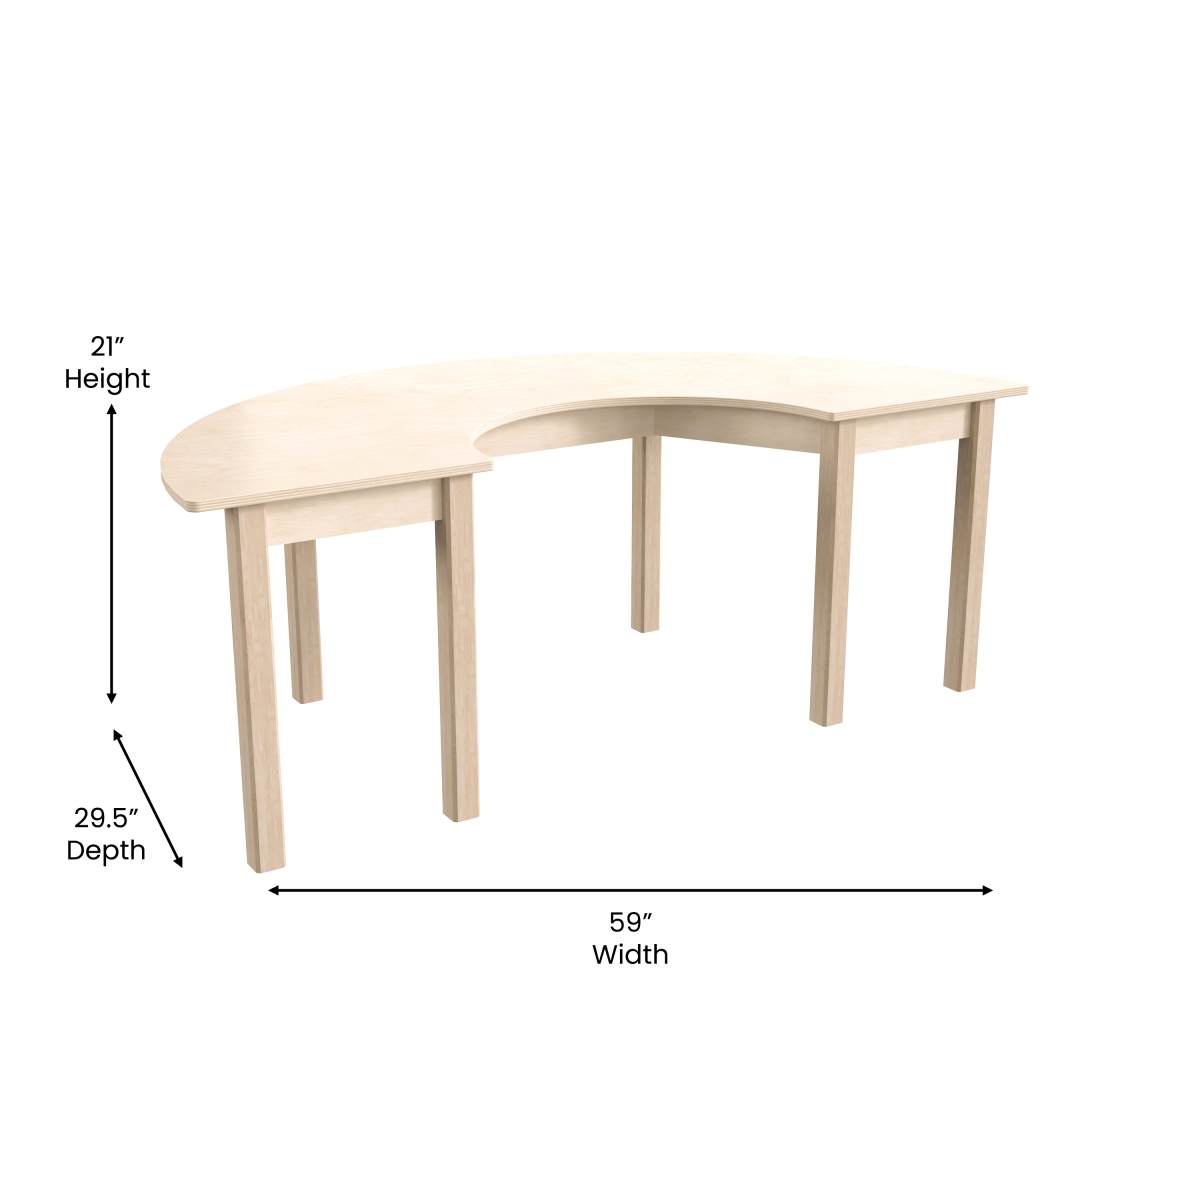 Picture of Flash Furniture MK-ME088015-GG 29.5 x 59 x 21 in. Bright Beginnings Commercial Grade Wooden Half Circle Preschool Classroom Activity Table, Beech